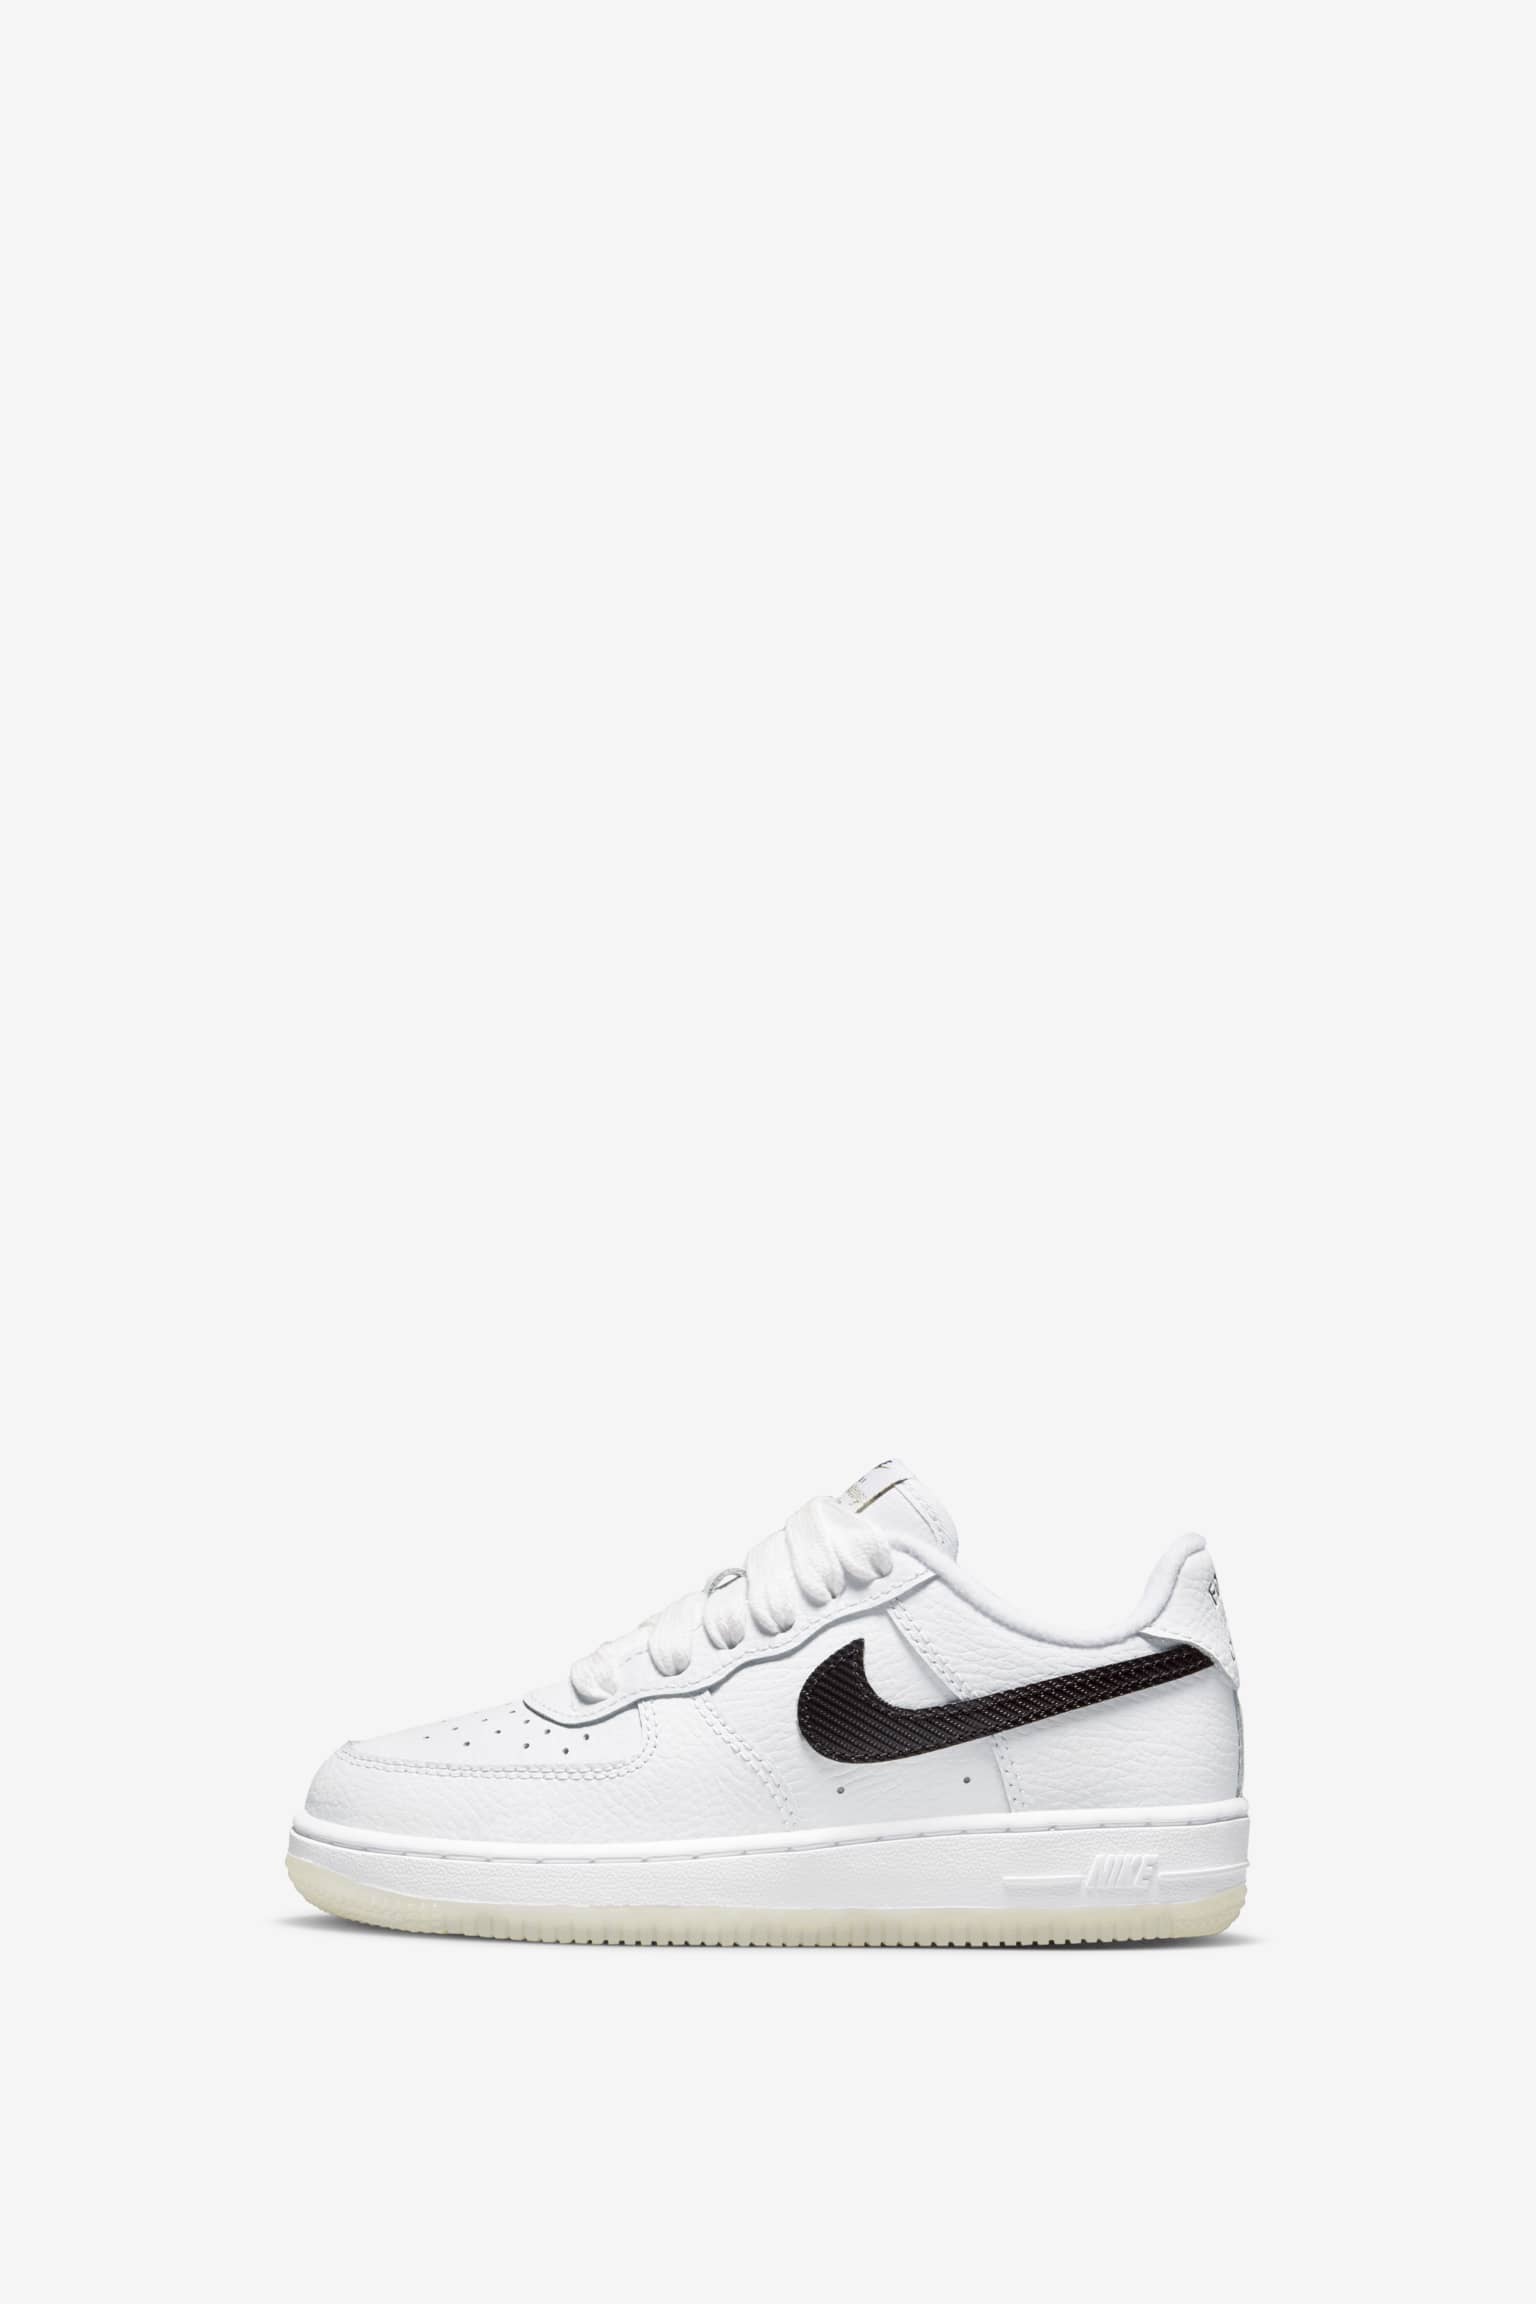 Air Force 1 '07 'Bronx Origins' (DX2305-100) Release Date. Nike SNKRS